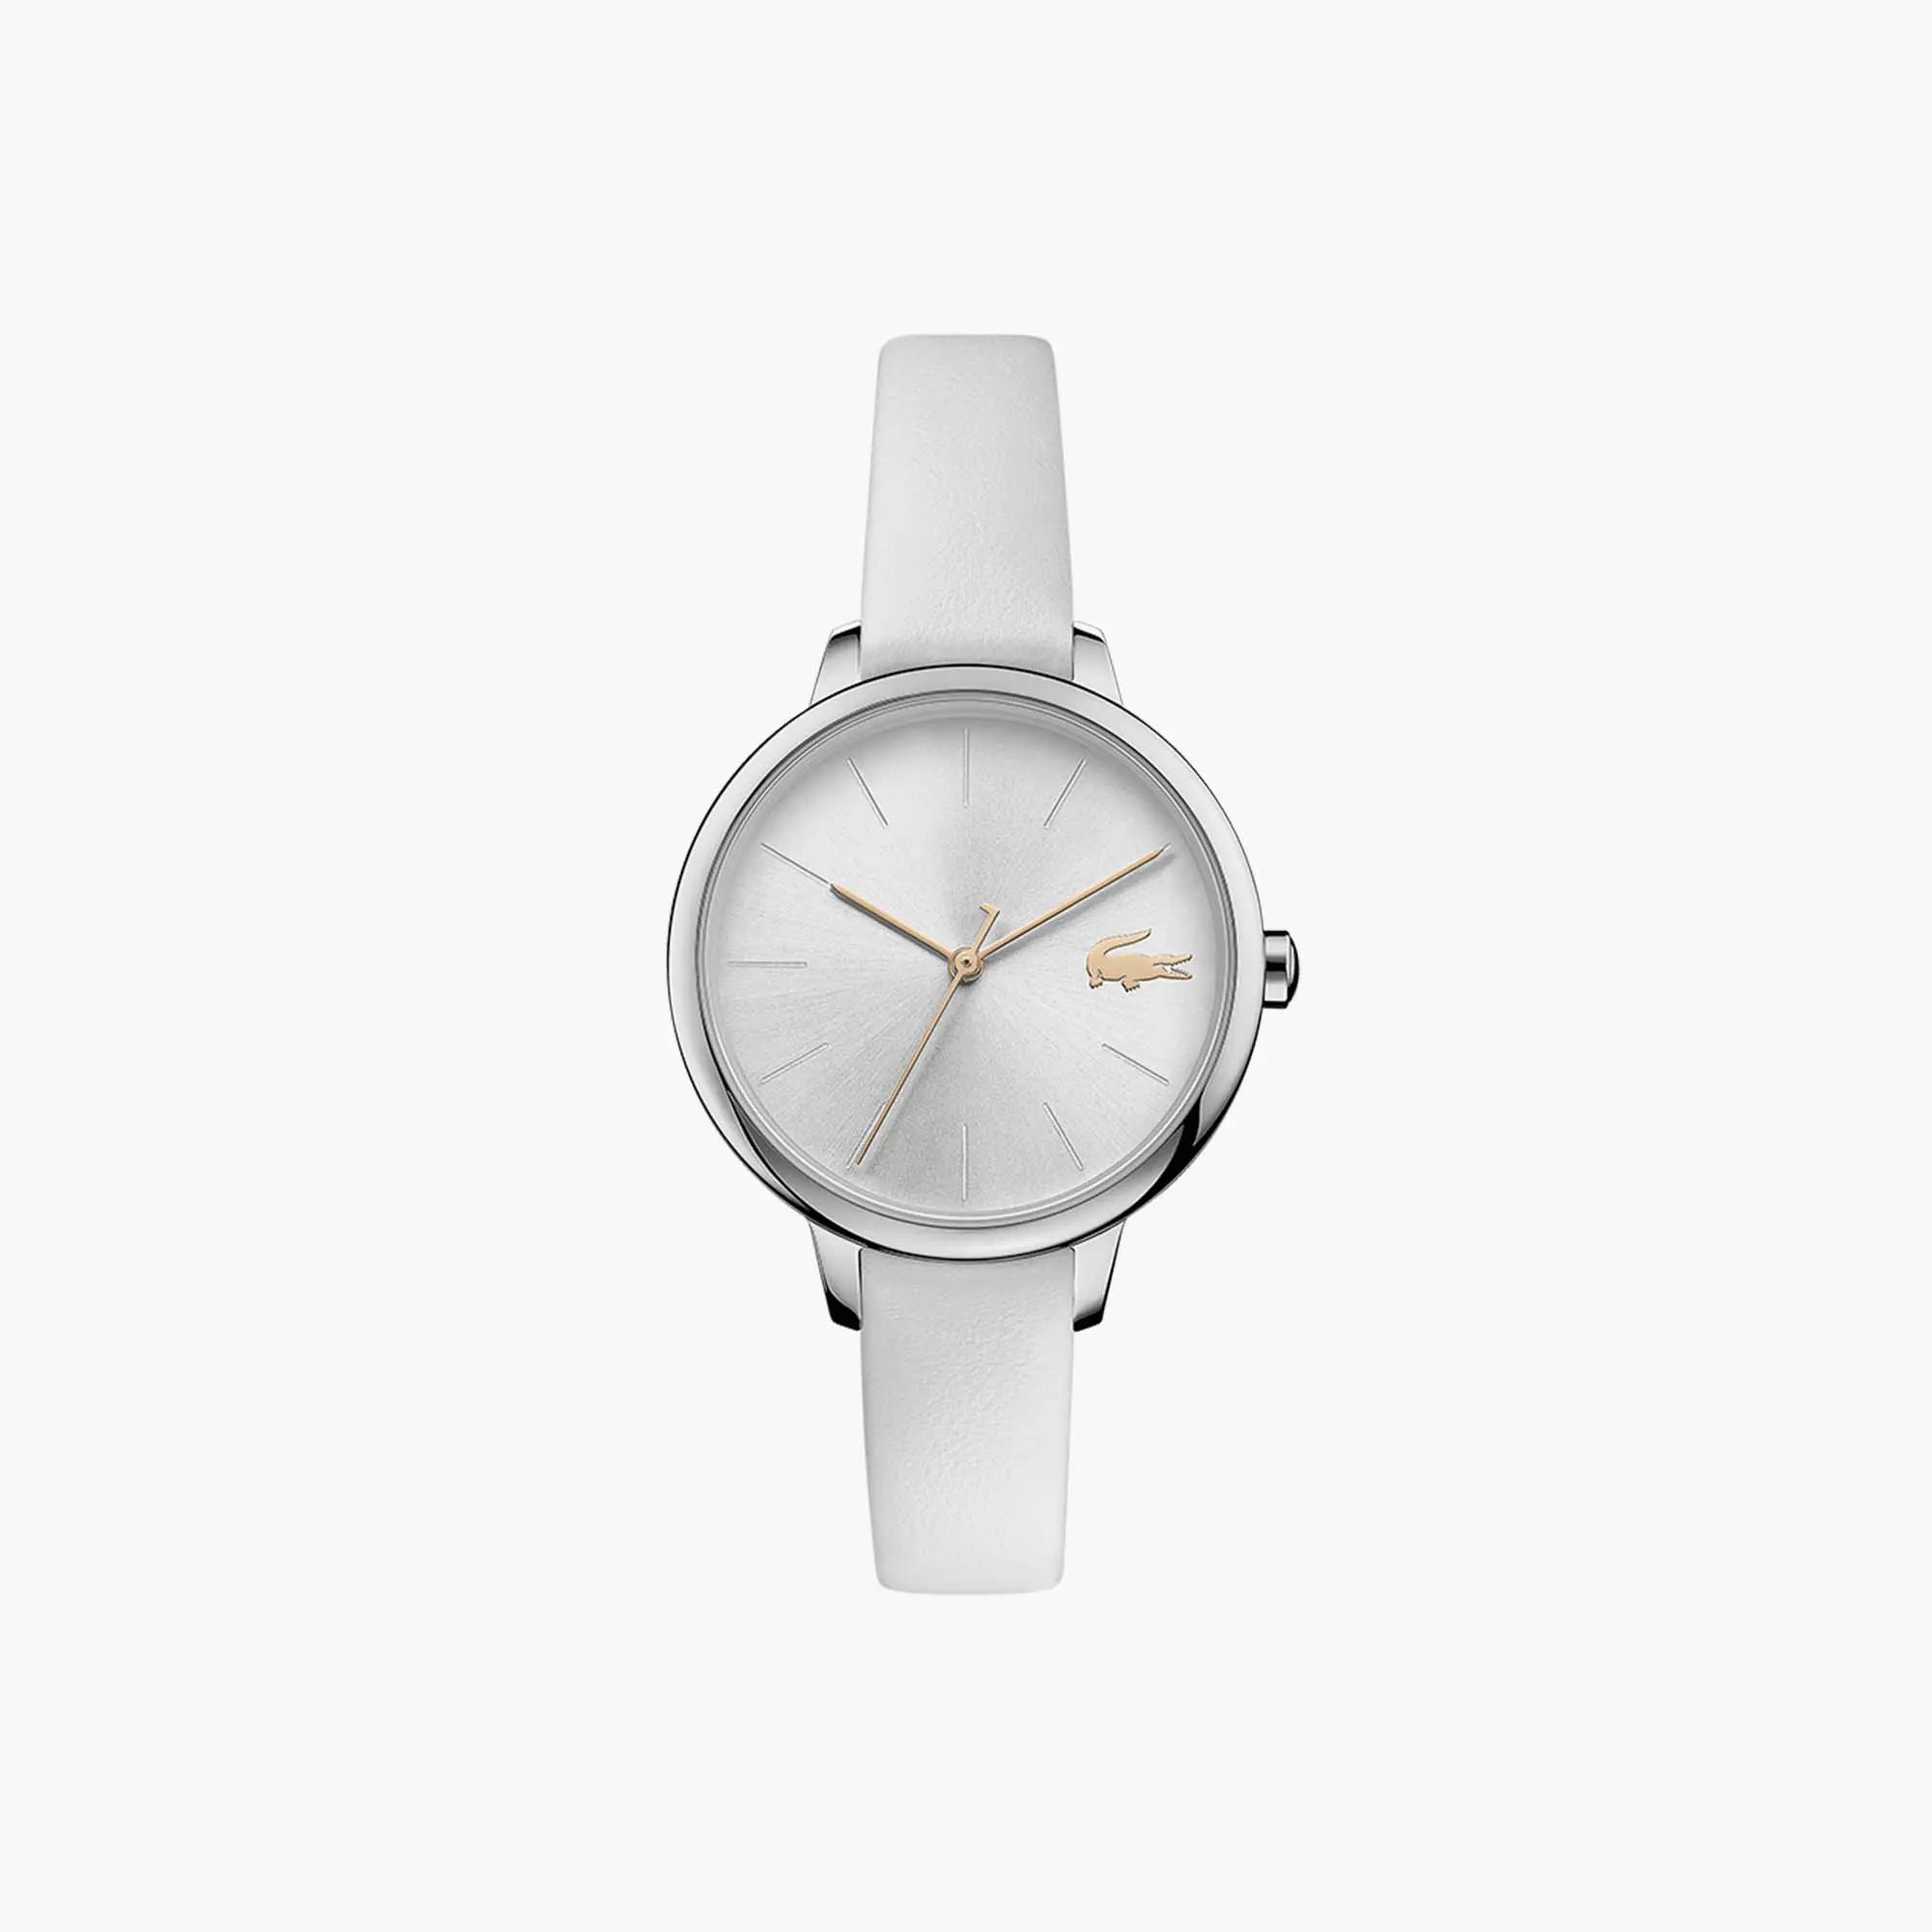 Lacoste Women's Cannes 3 Hands Leather Watch. 1